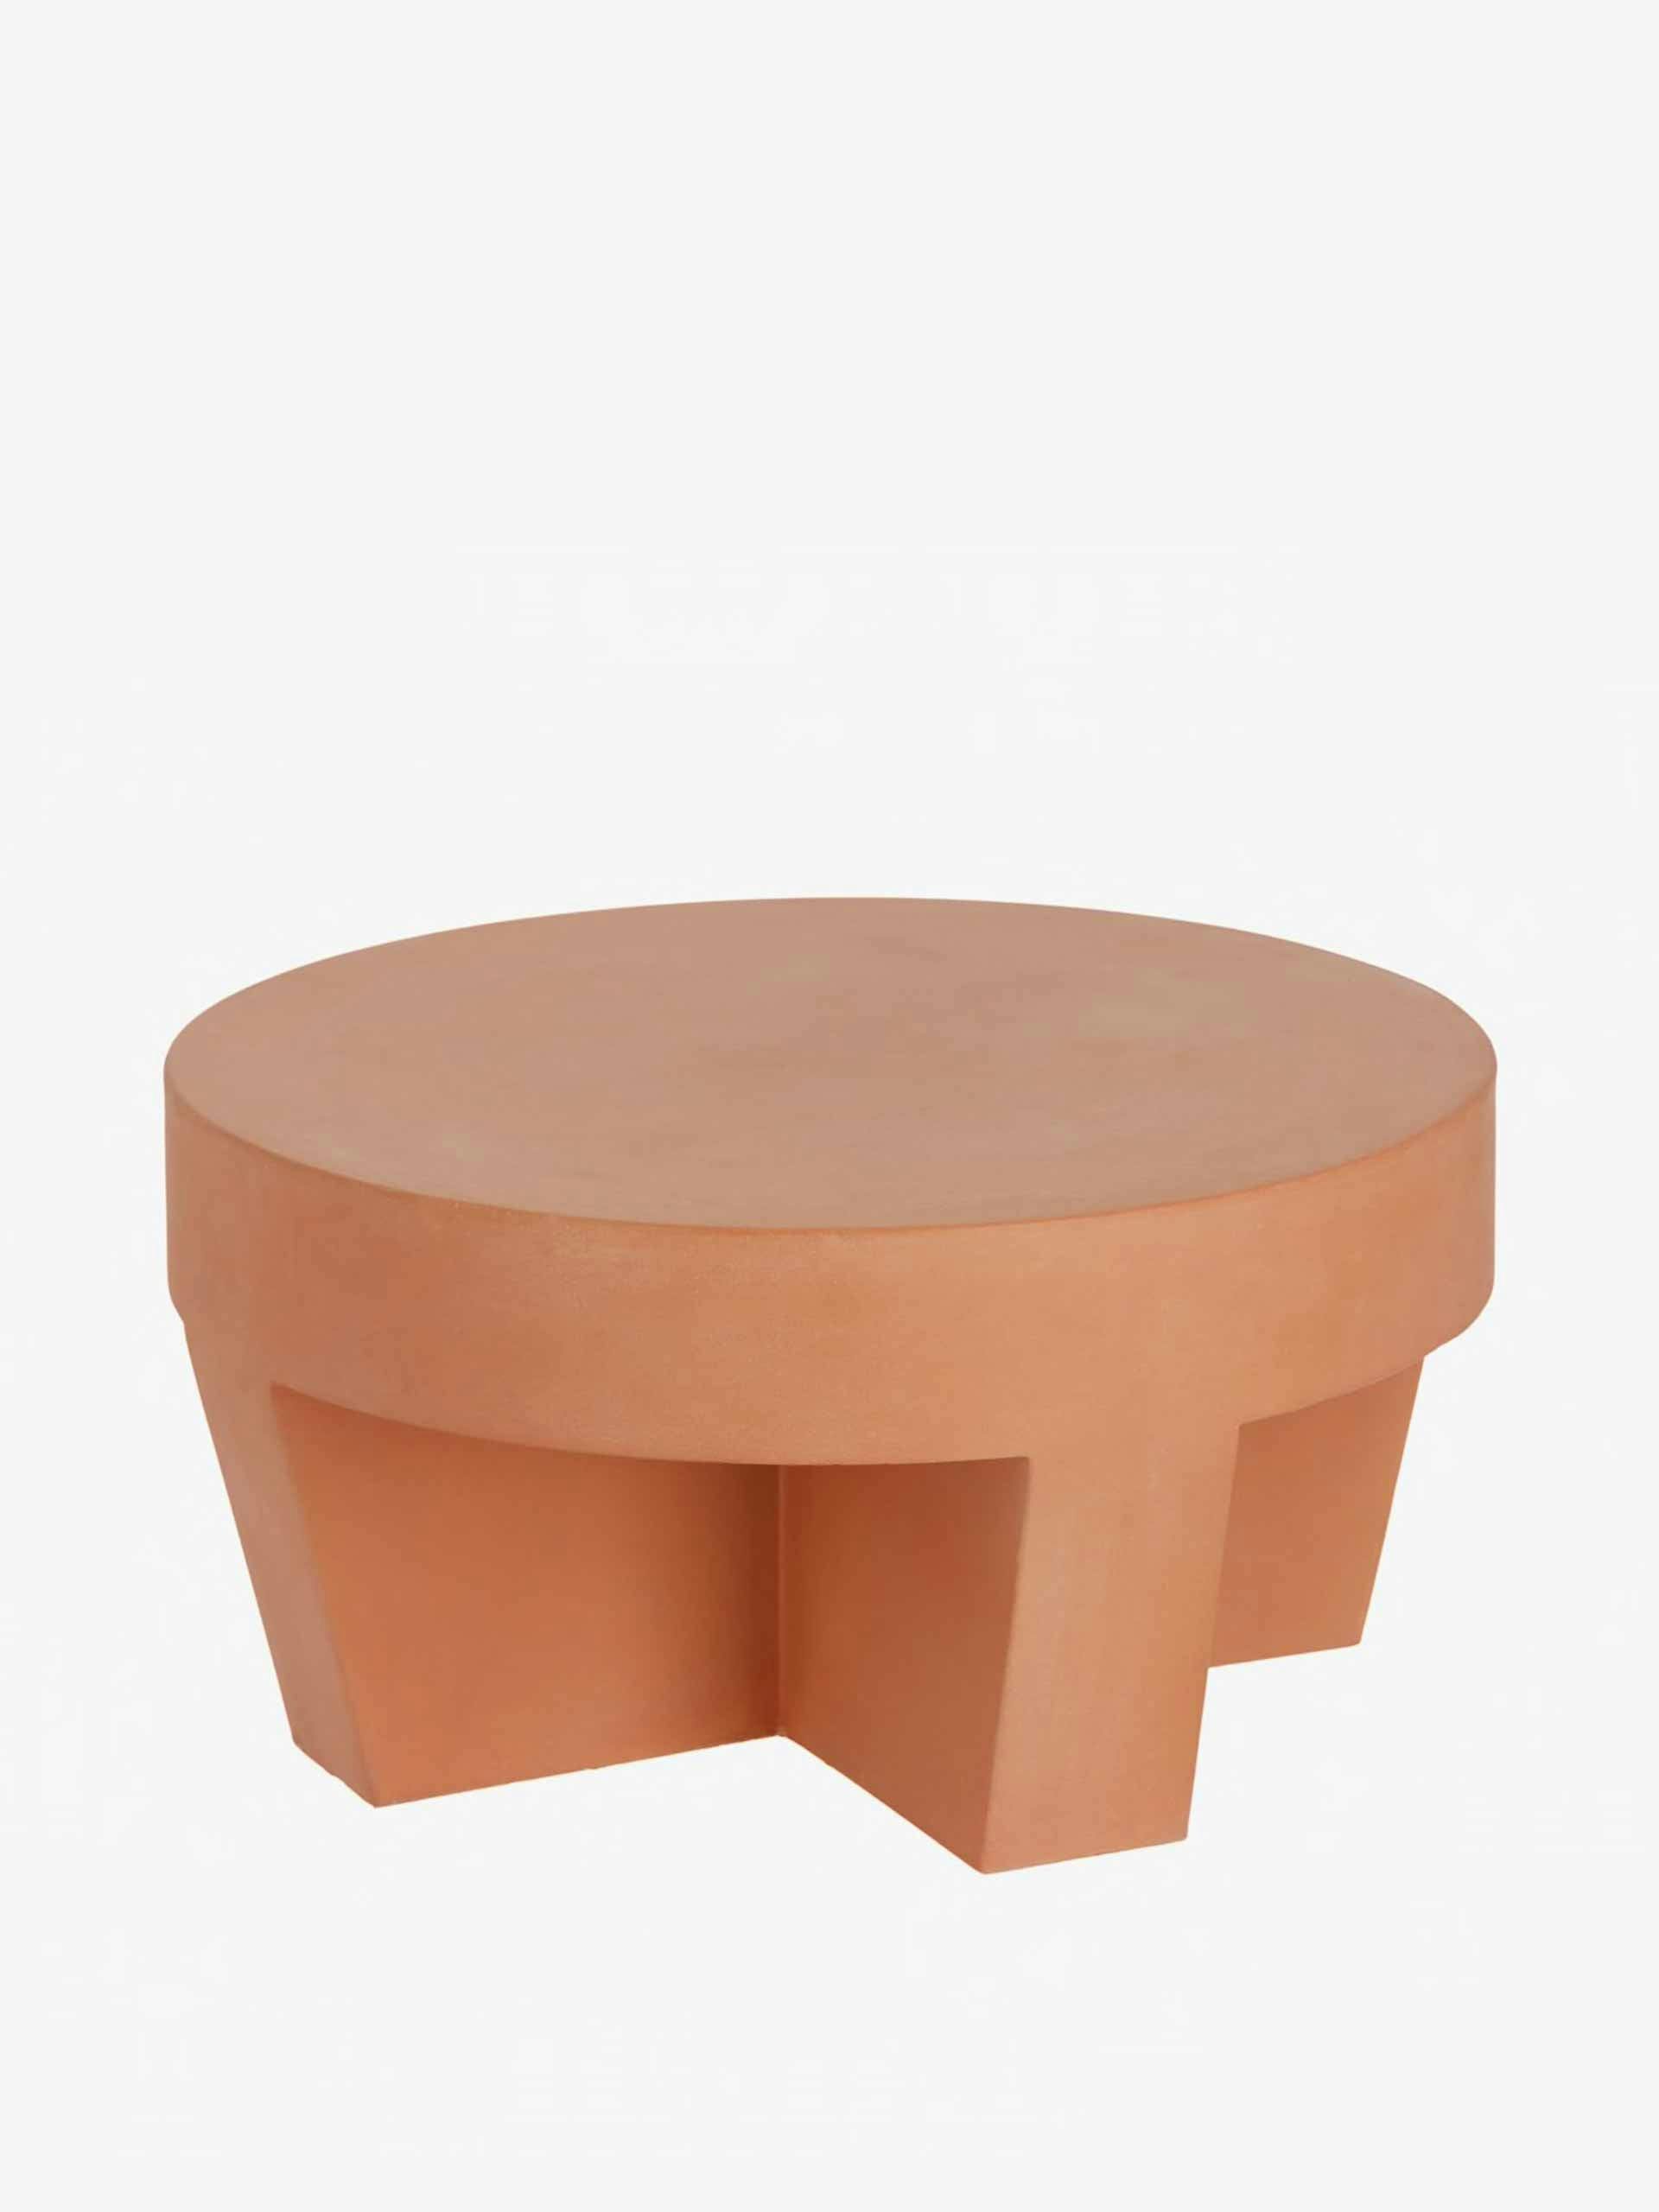 Round outdoor terracotta coffee table